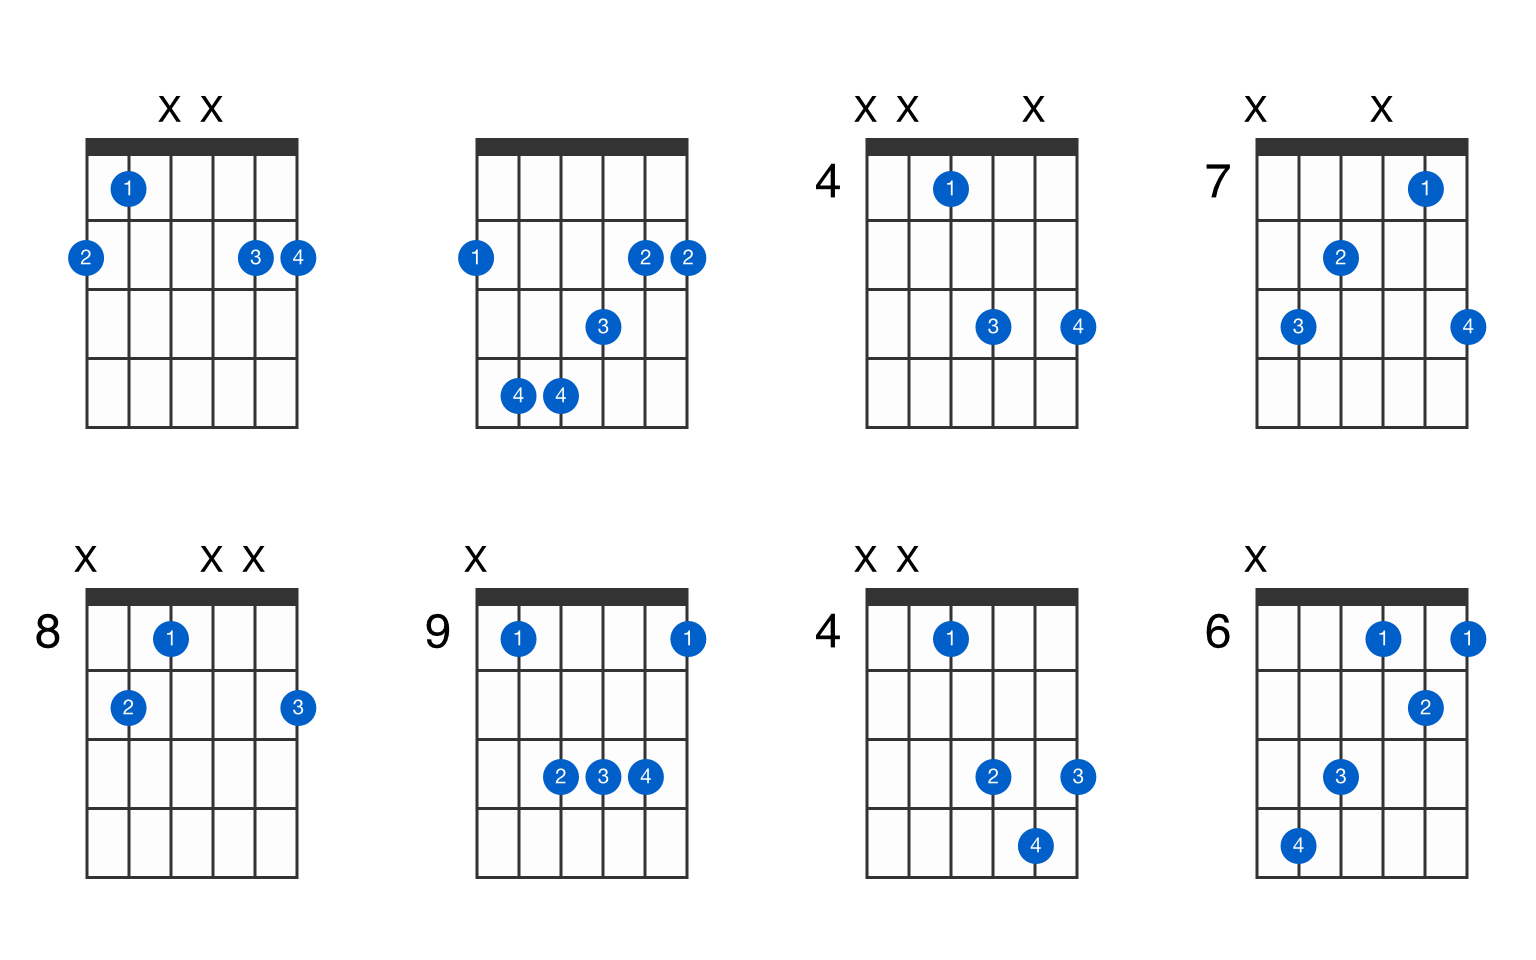 g flat major scale degrees